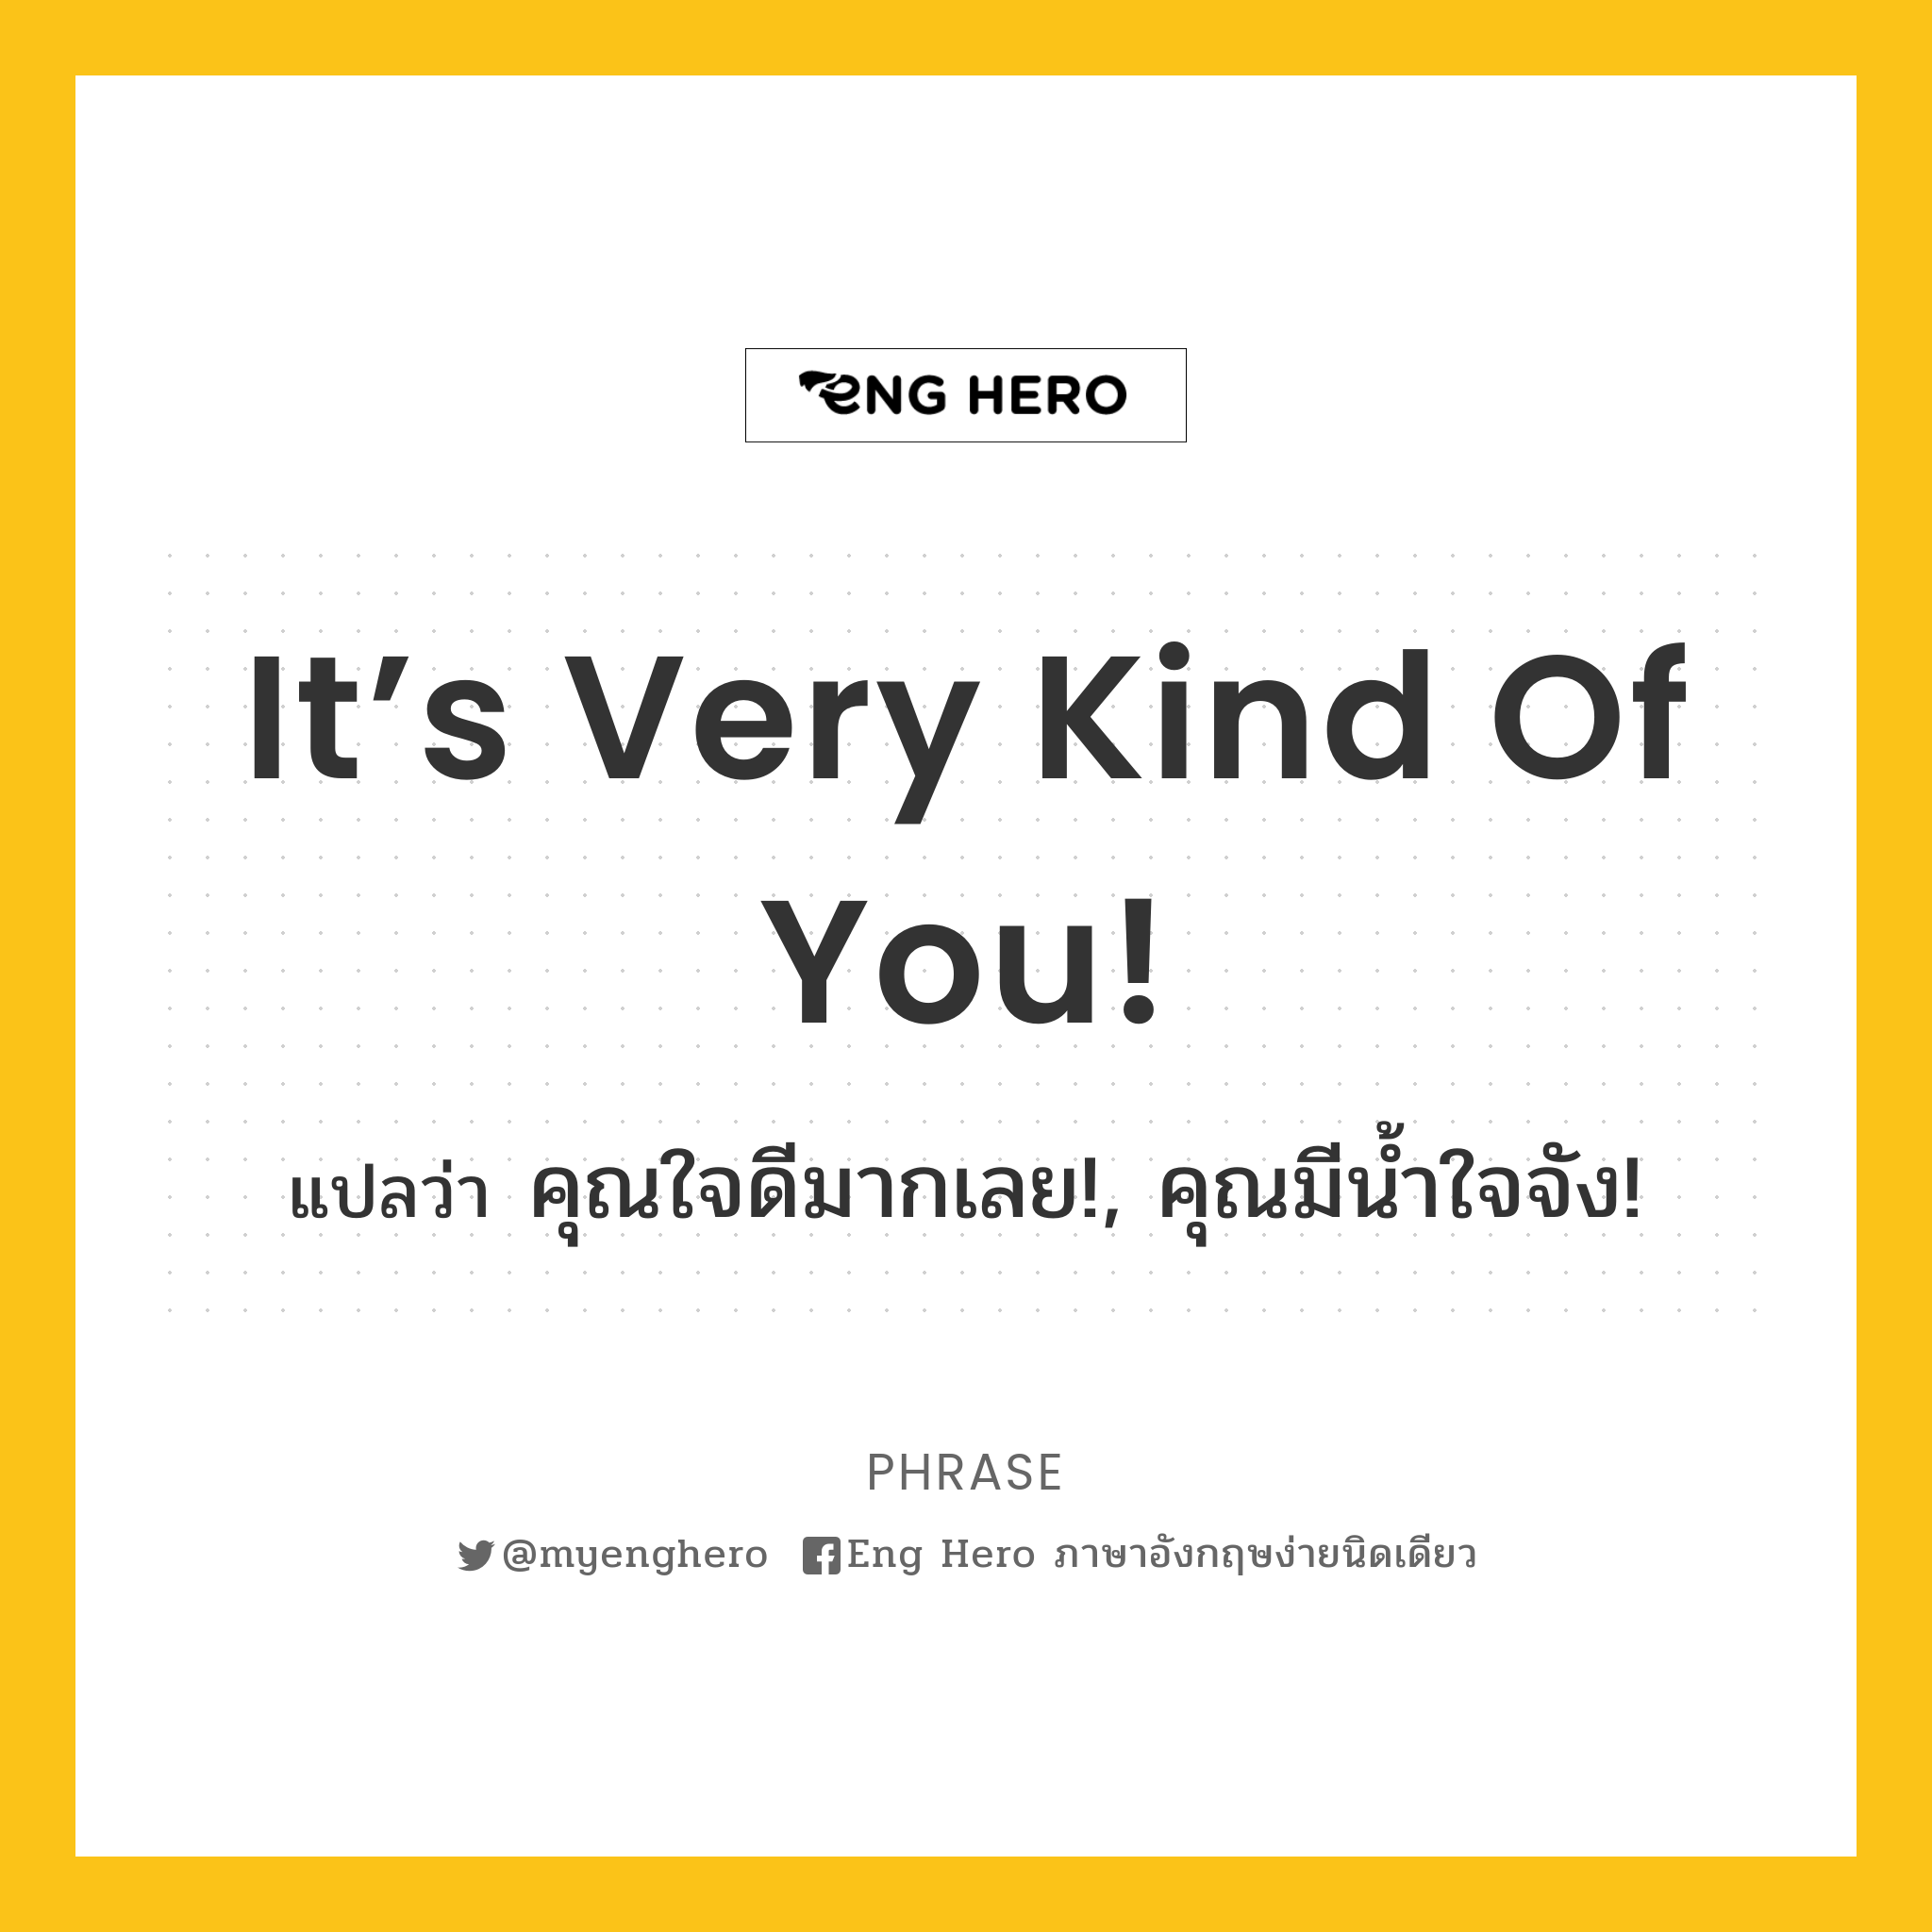 It’s very kind of you!